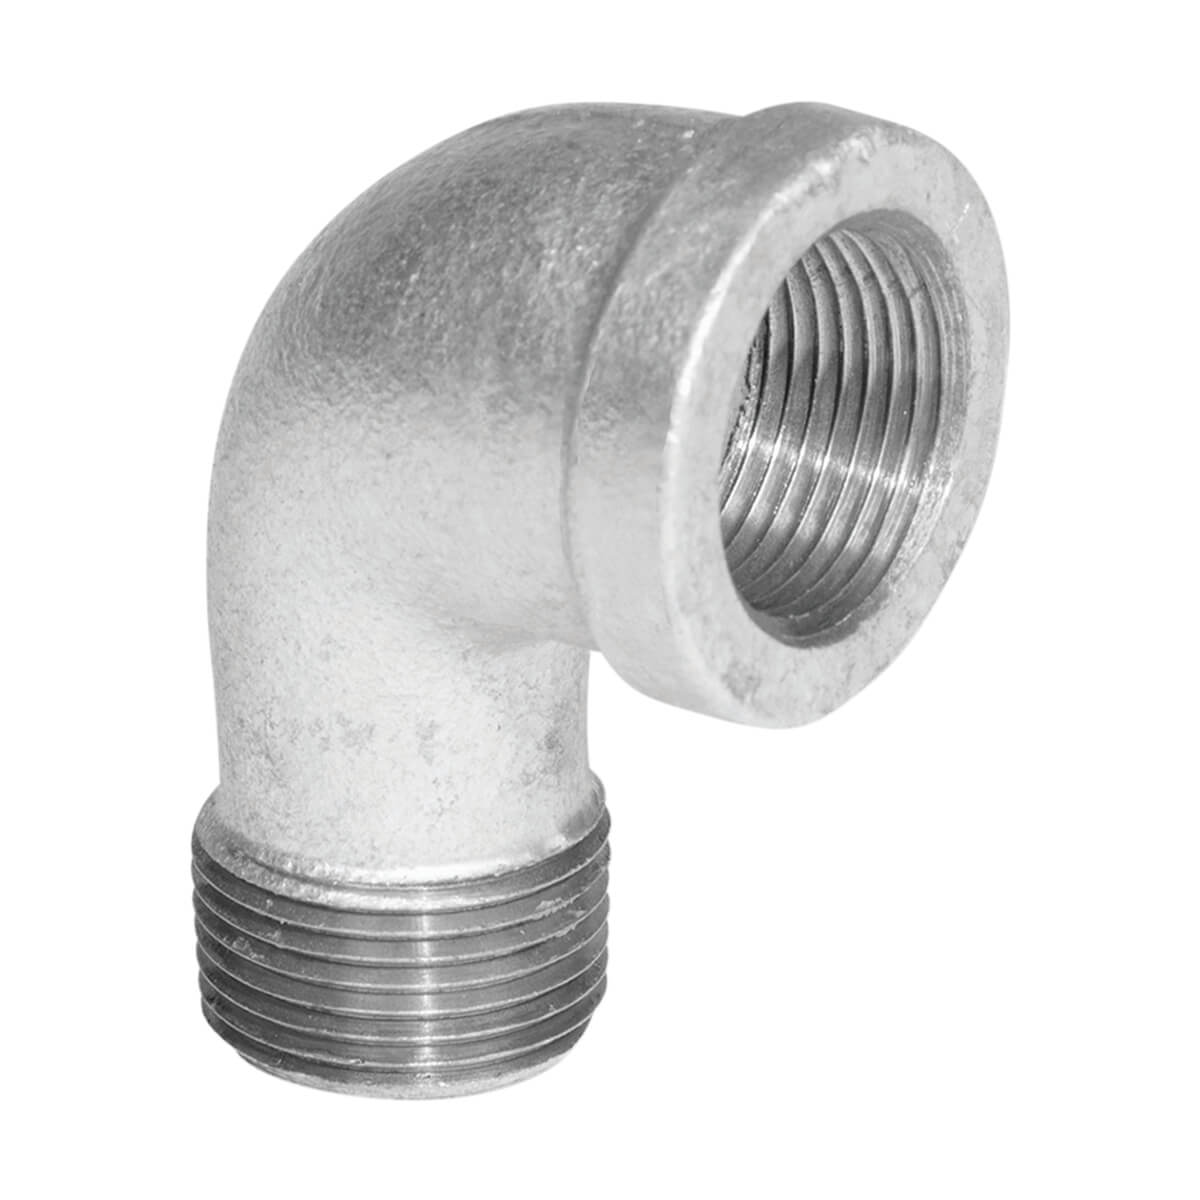 Fitting Galvanized Iron 90° ST Elbow - 1-1/2-in